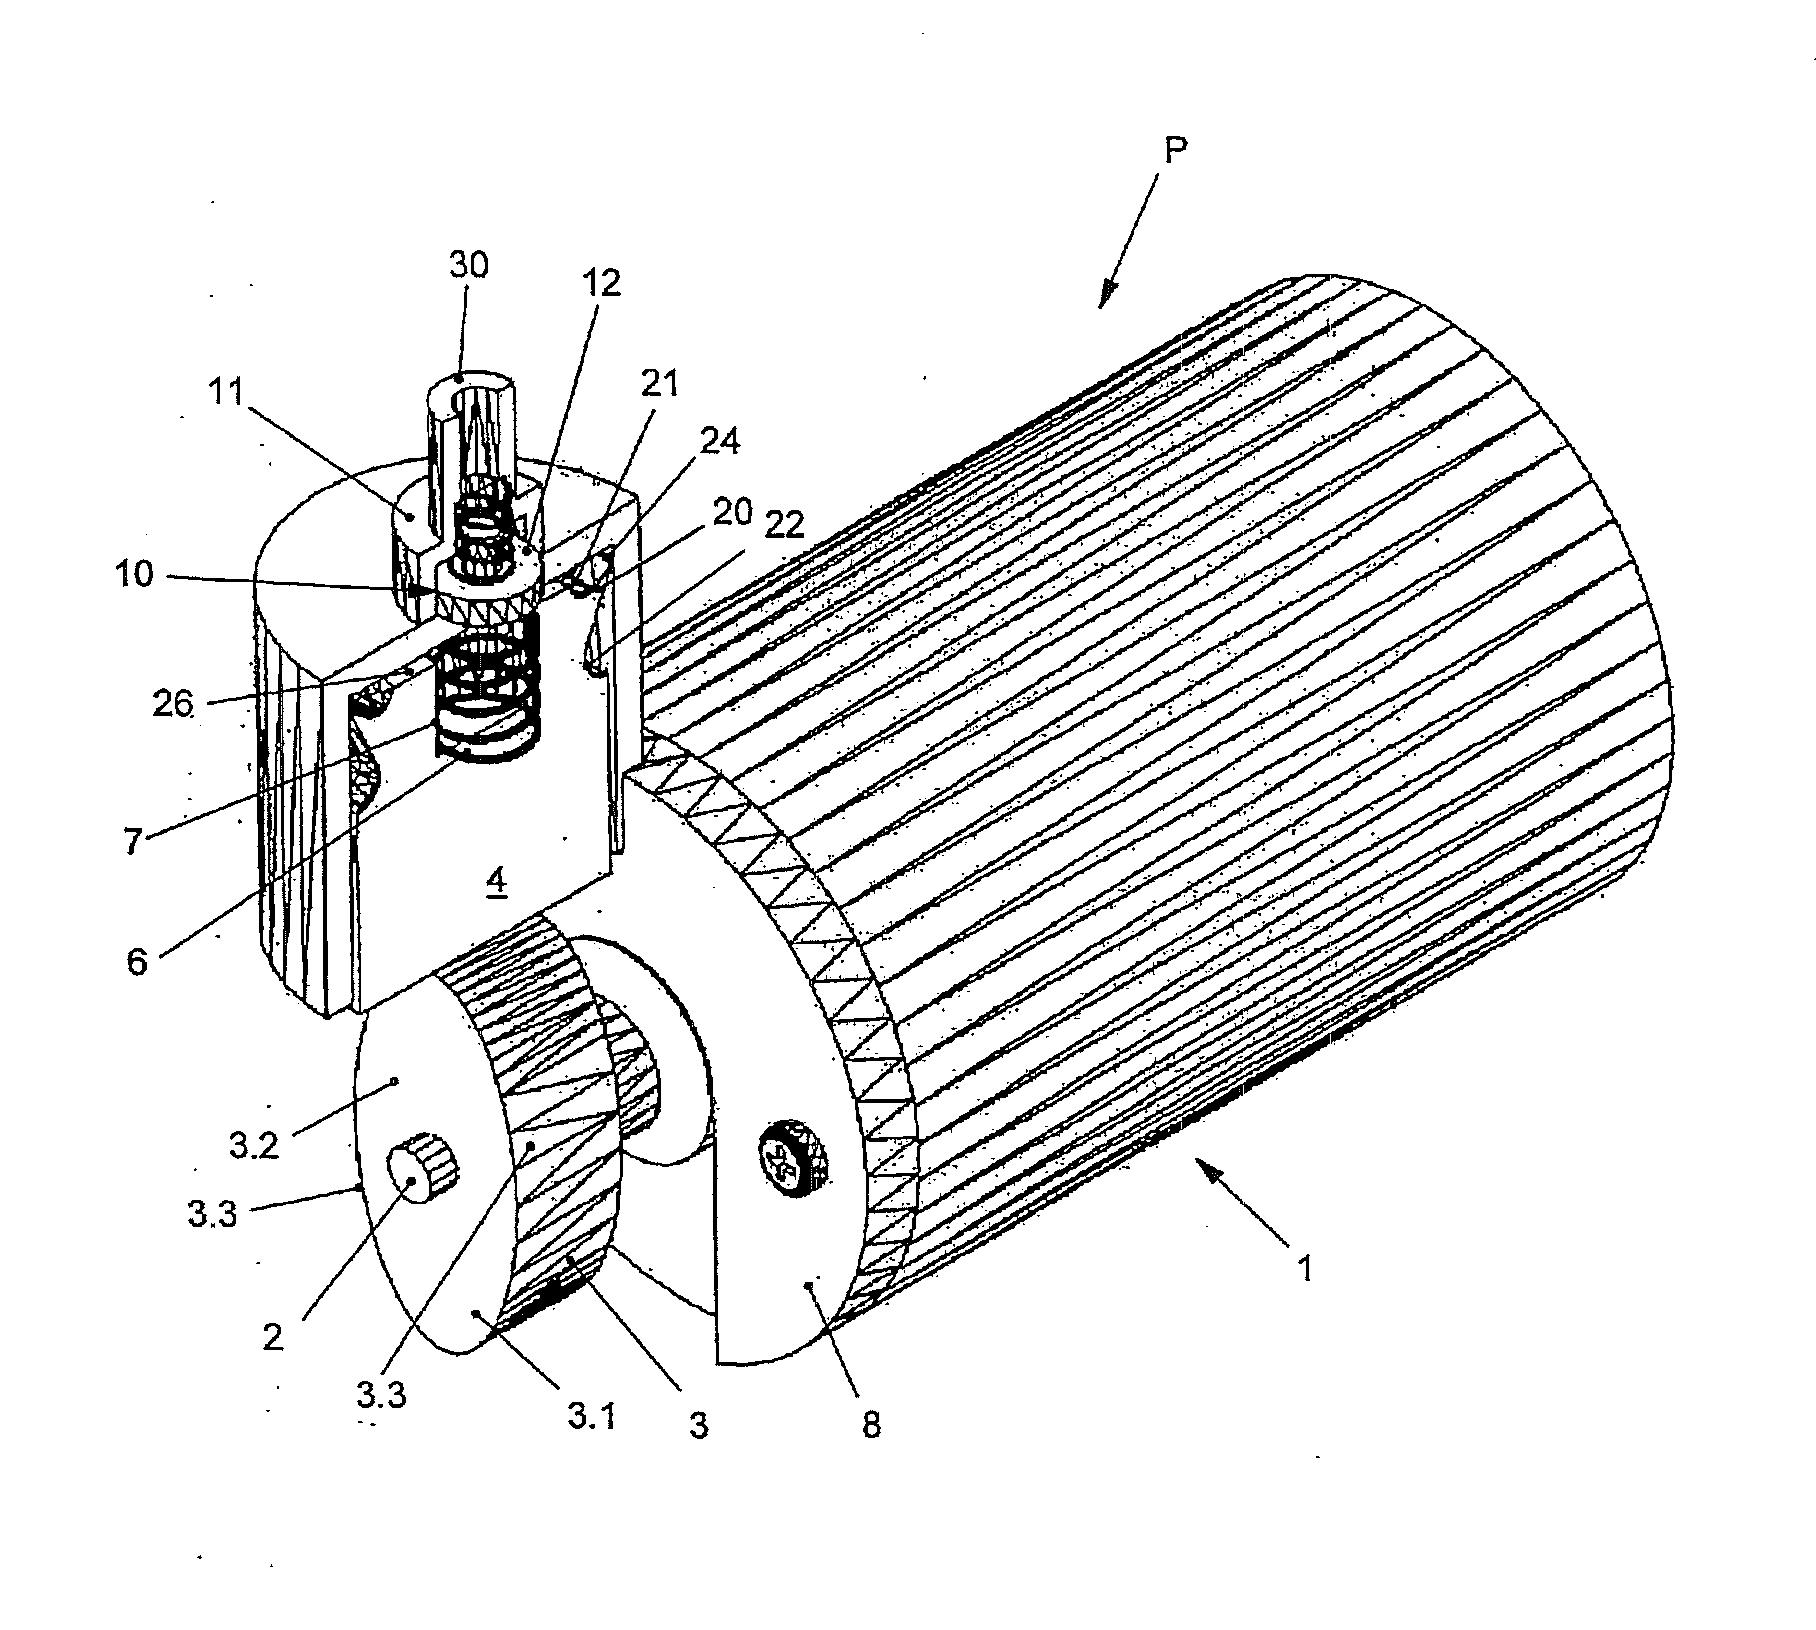 Device for delivering a gas